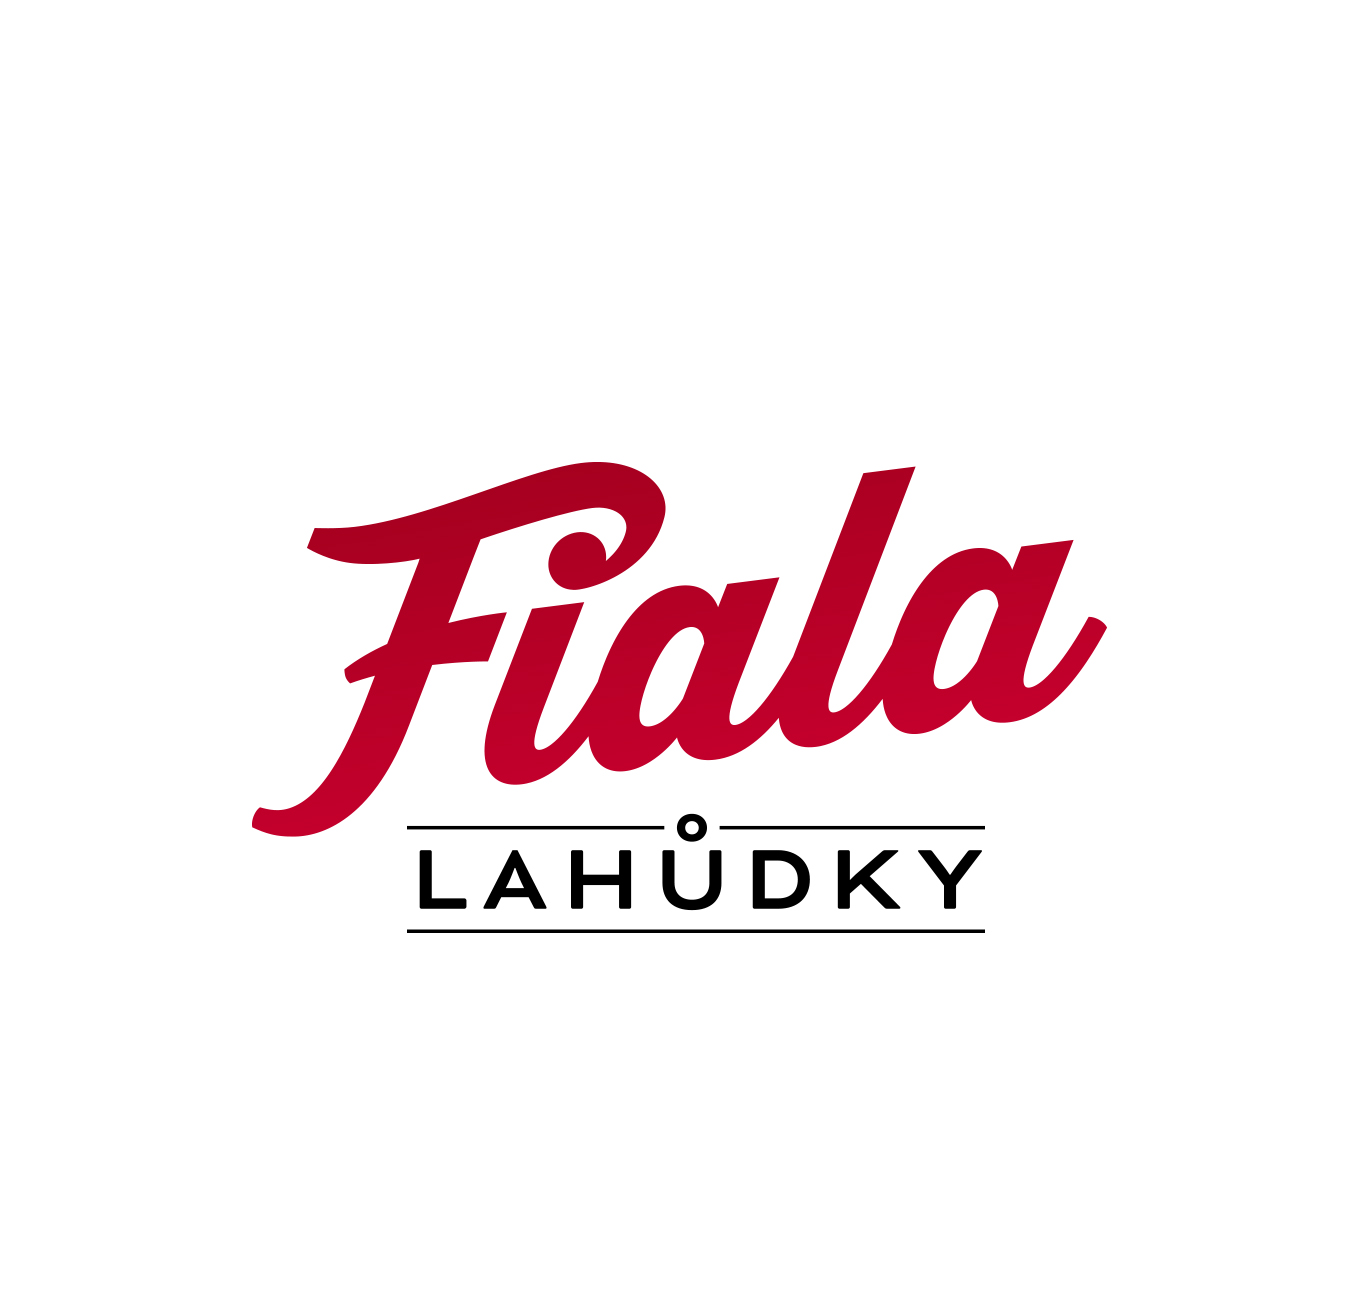 [album/Products_Model_Product/133/Lahudky_Fiala_logo_02.jpg]